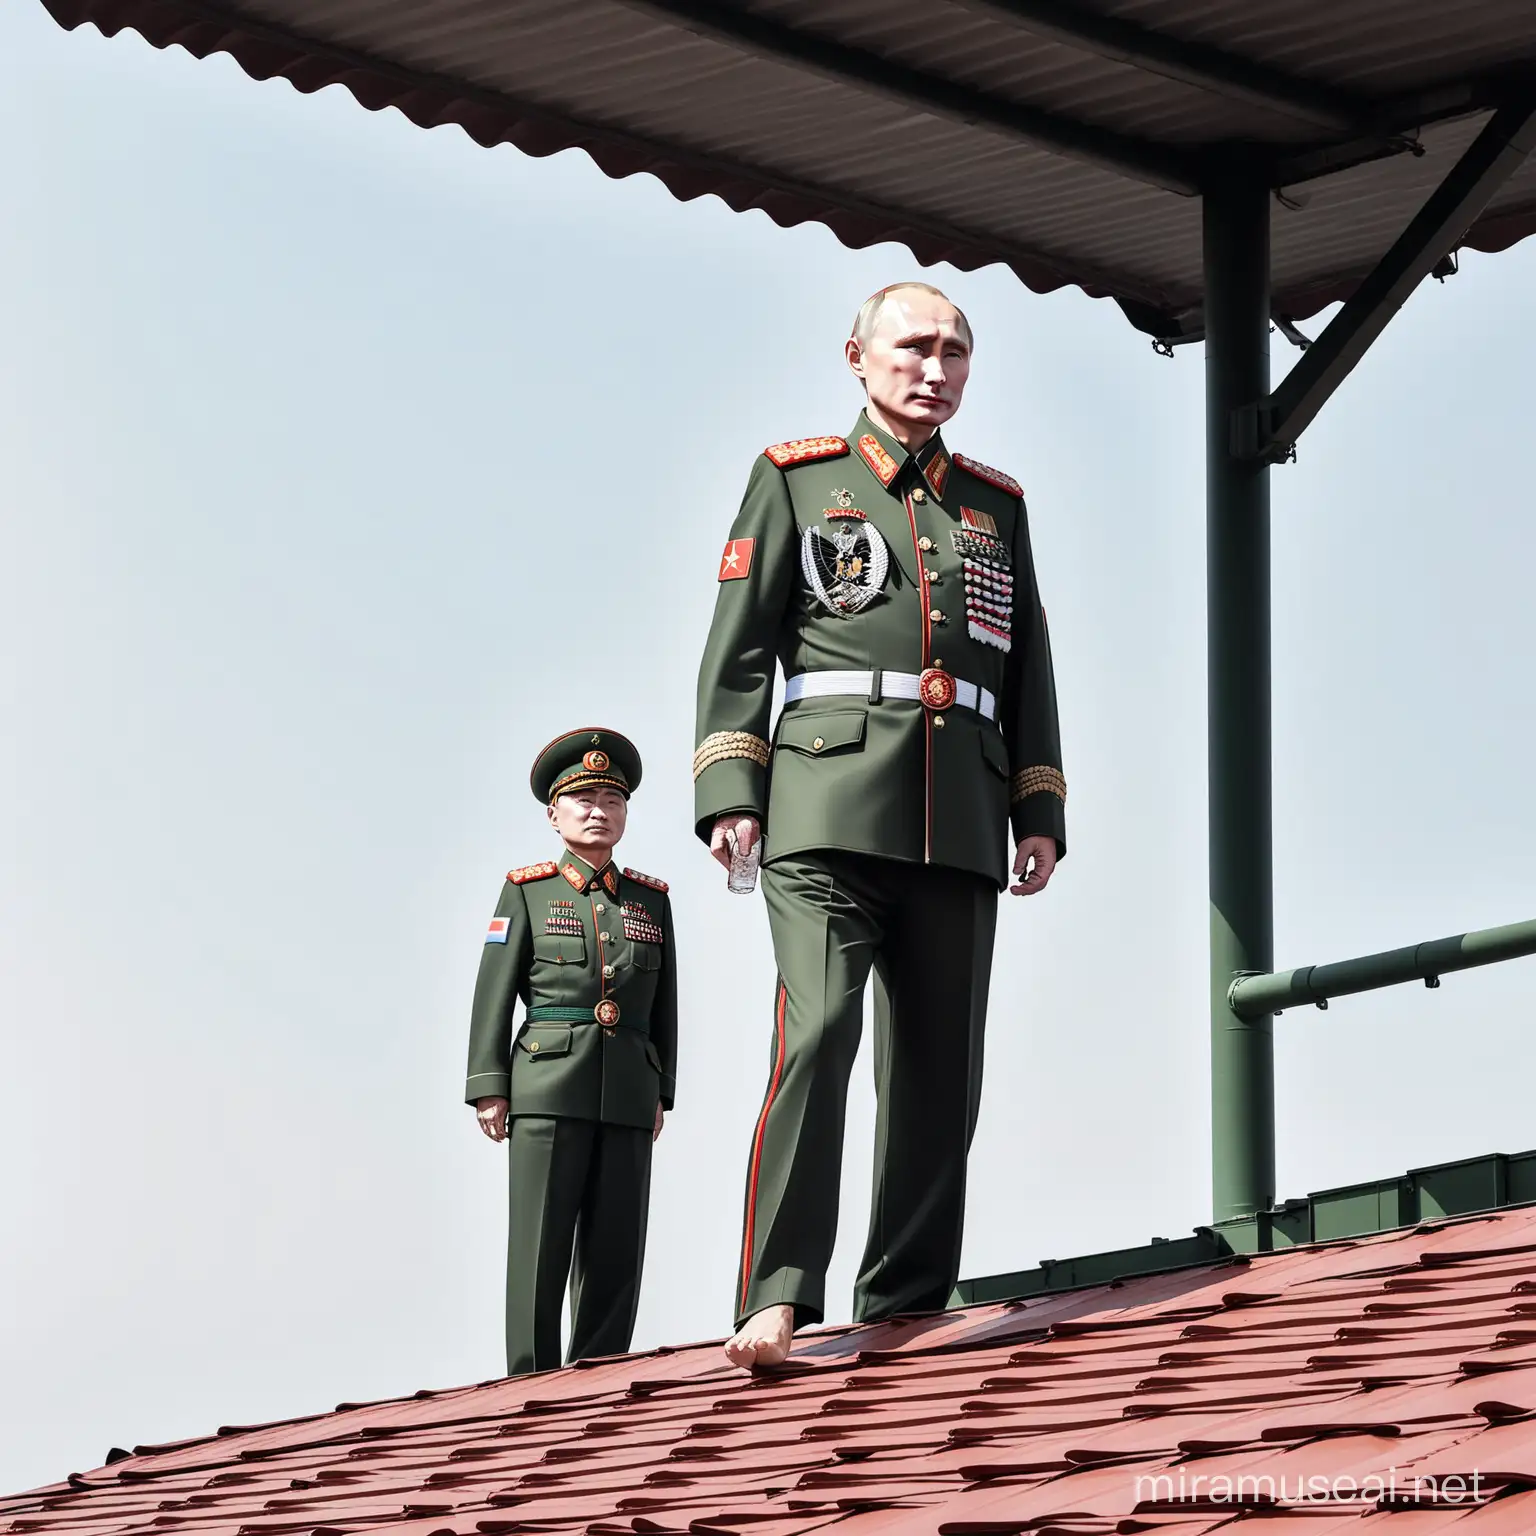 Barefoot Putin atop Air Defense Entrance Roof in Vintage Chinese Military Uniform with Vodka Labels